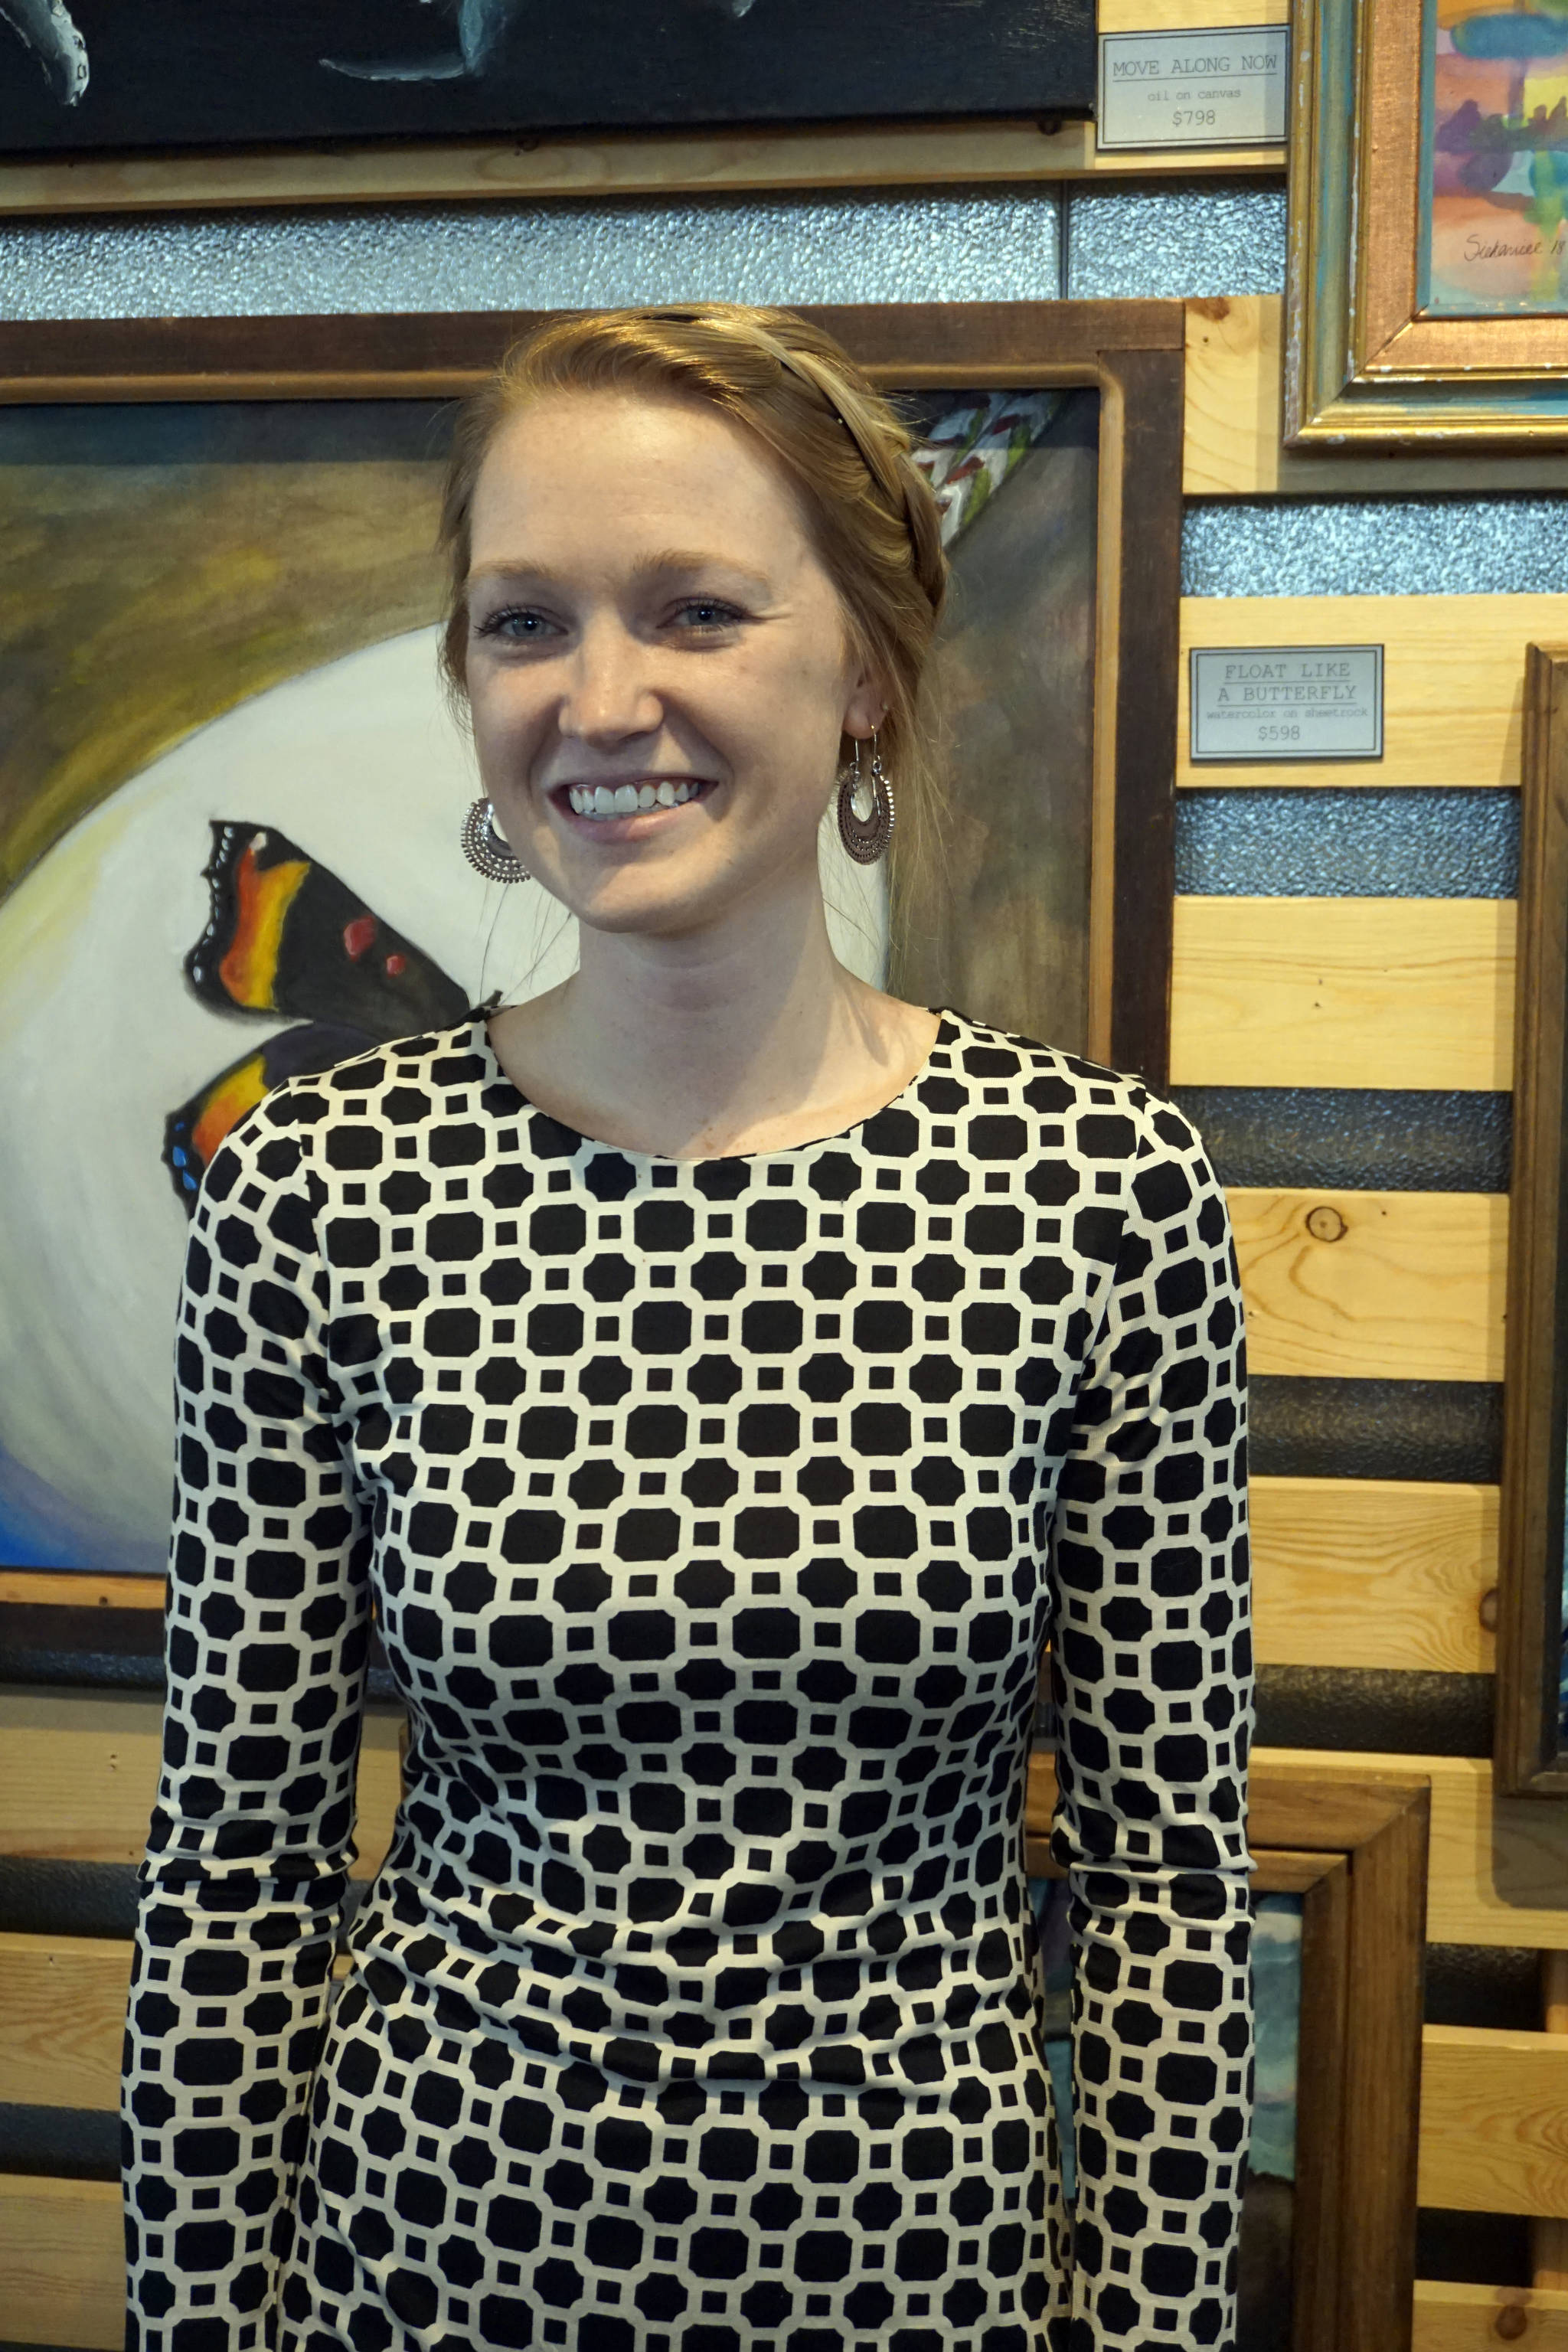 Britni Siekaniec stands by one of her paintings at the First Friday opening of her show, “Salt,” at Grace Ridge Brewery on April 6, 2018, in Homer, Alaska. (Photo by Michael Armstrong, Homer News)